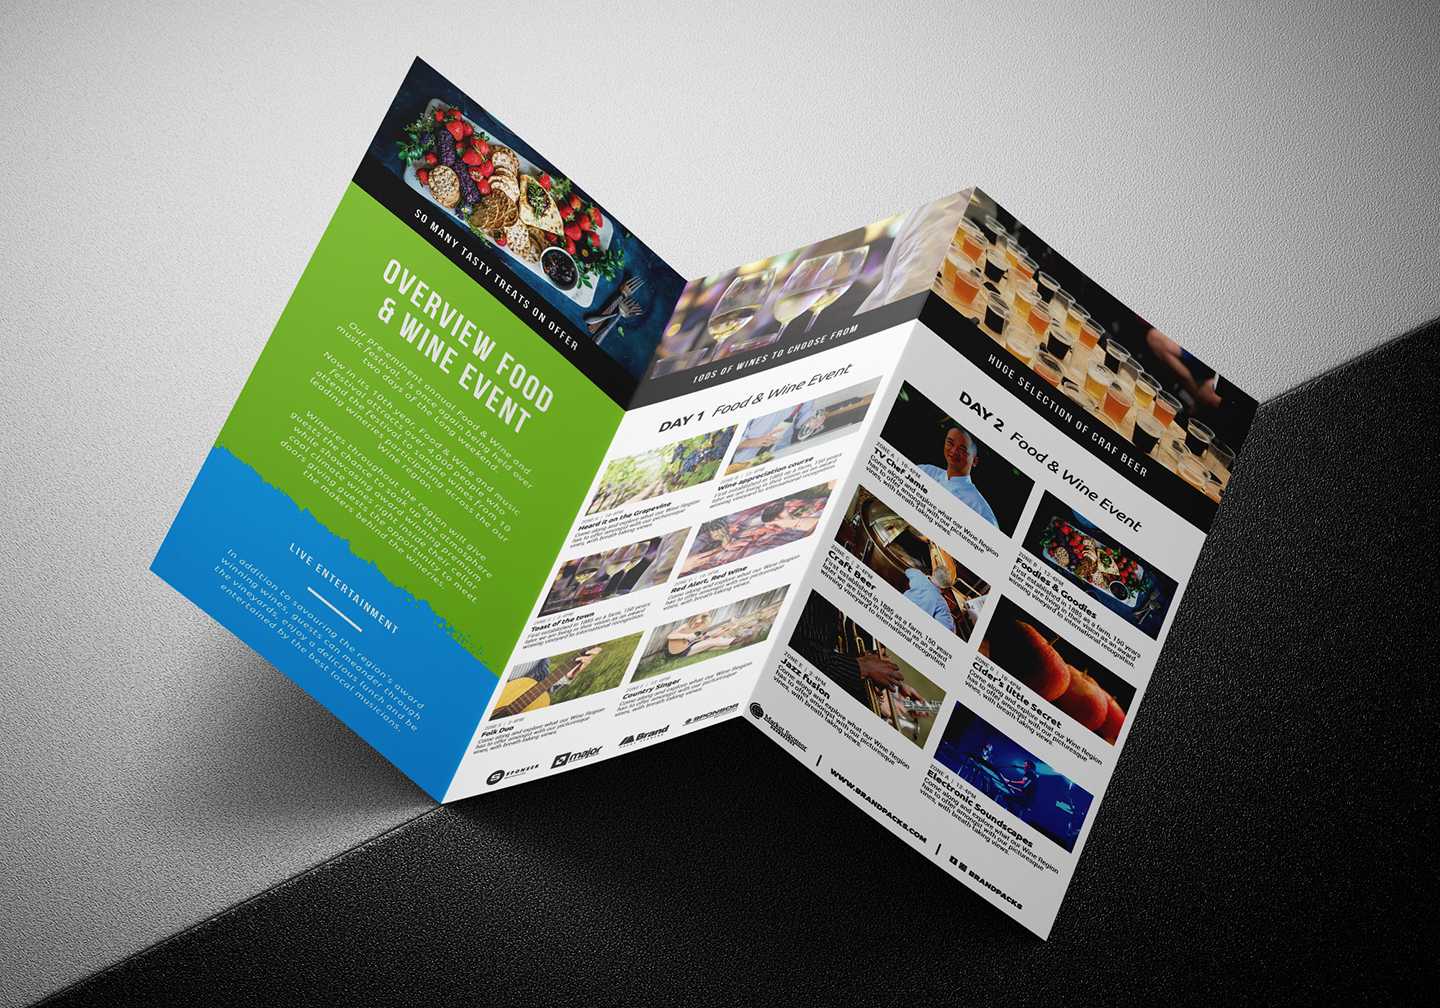 Free Tri Fold Brochure Template For Events & Festivals – Psd With Regard To 3 Fold Brochure Template Psd